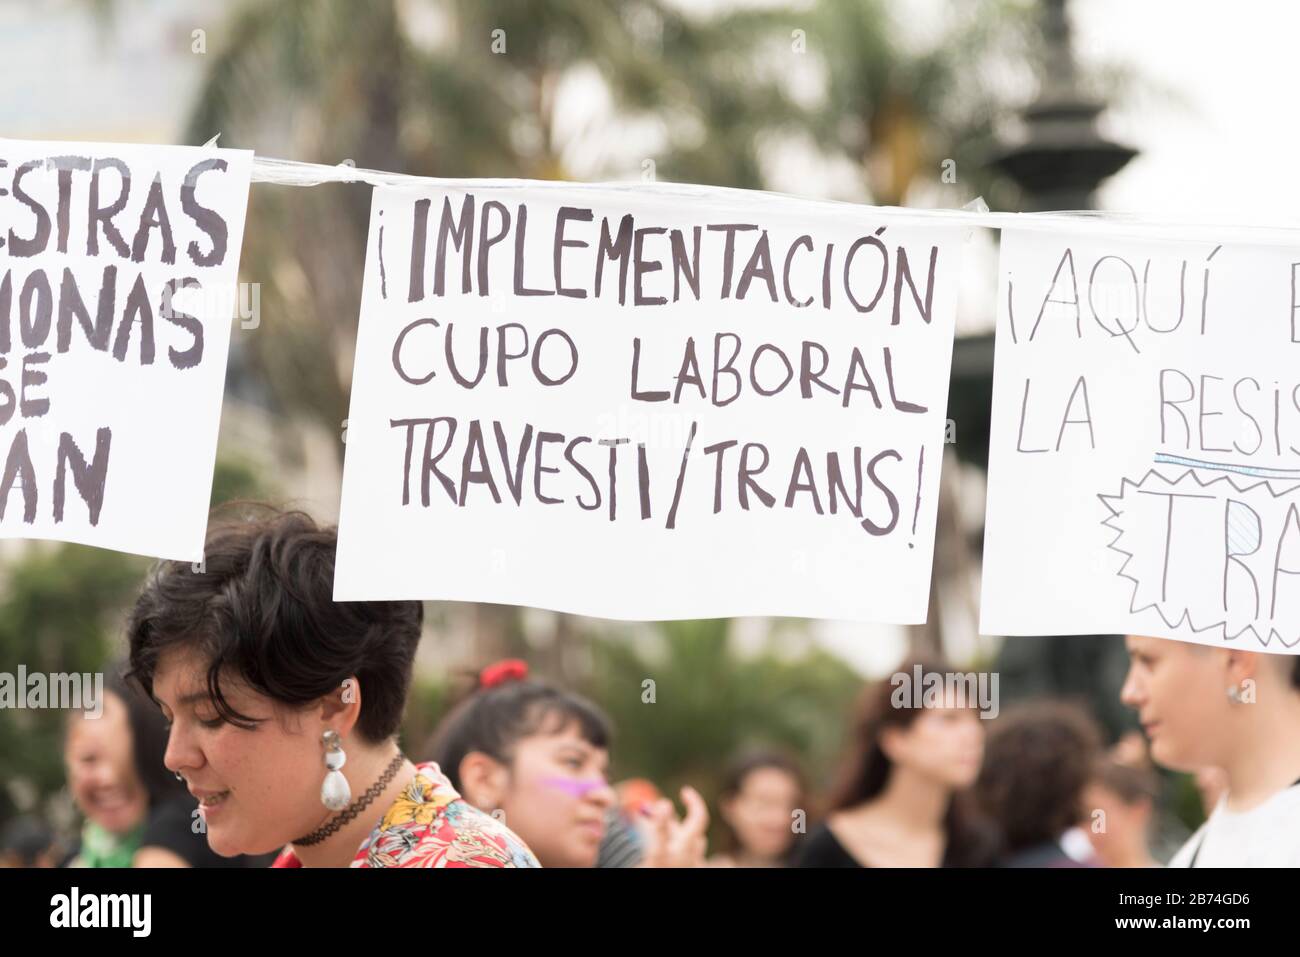 CABA, Buenos Aires / Argentina; March 9, 2020: international women's day. Poster: Implementation of trans labor quota Stock Photo